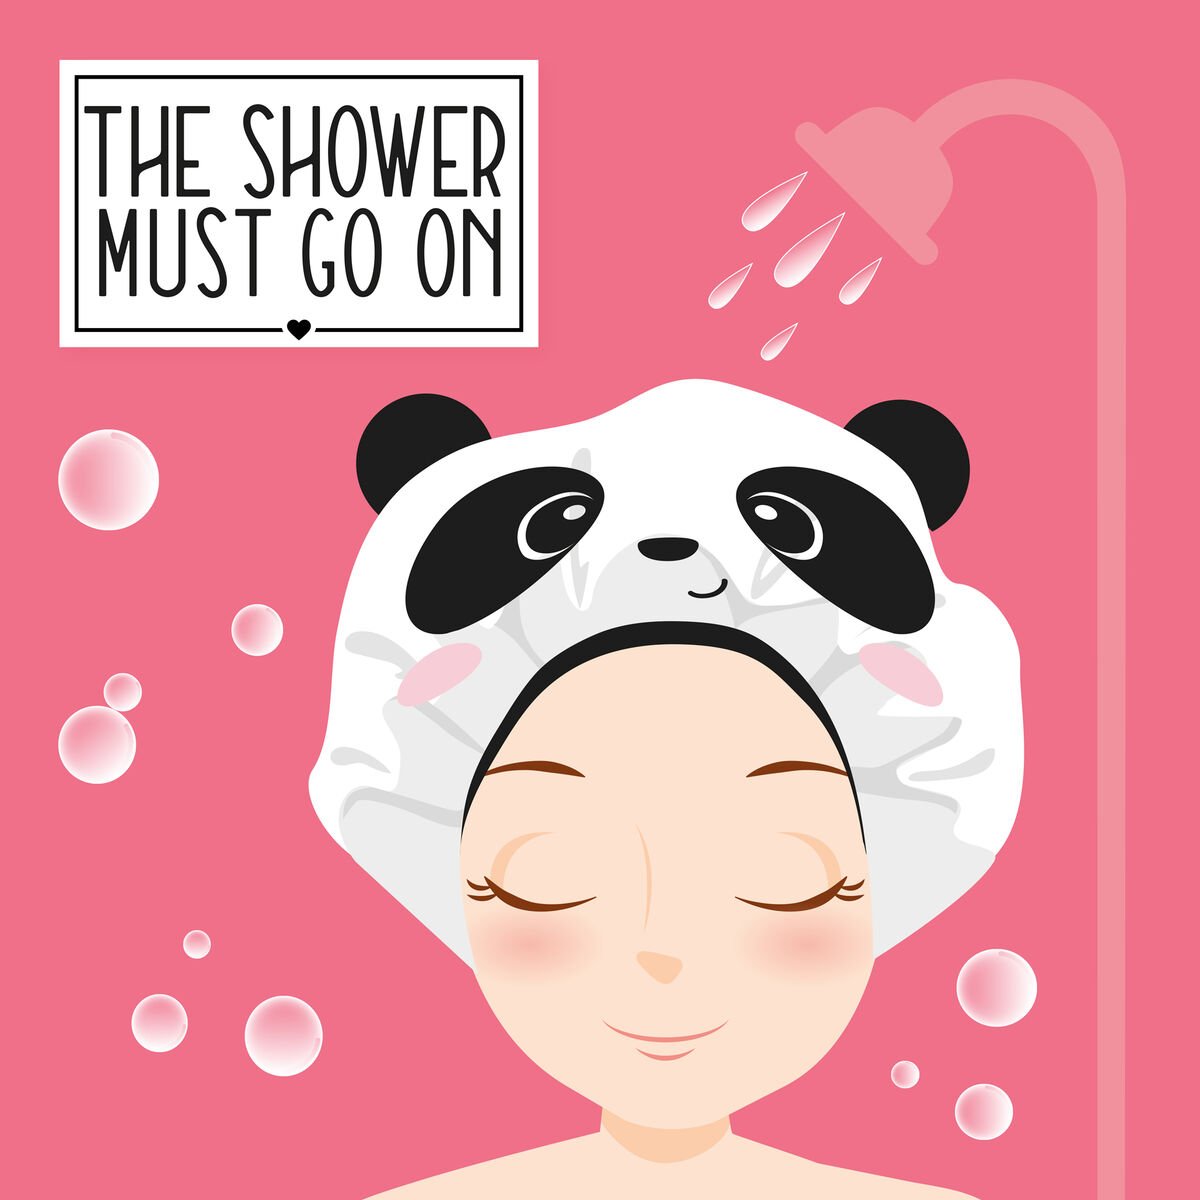 Charlotte de Douche - The Shower Must Go On, , zoo